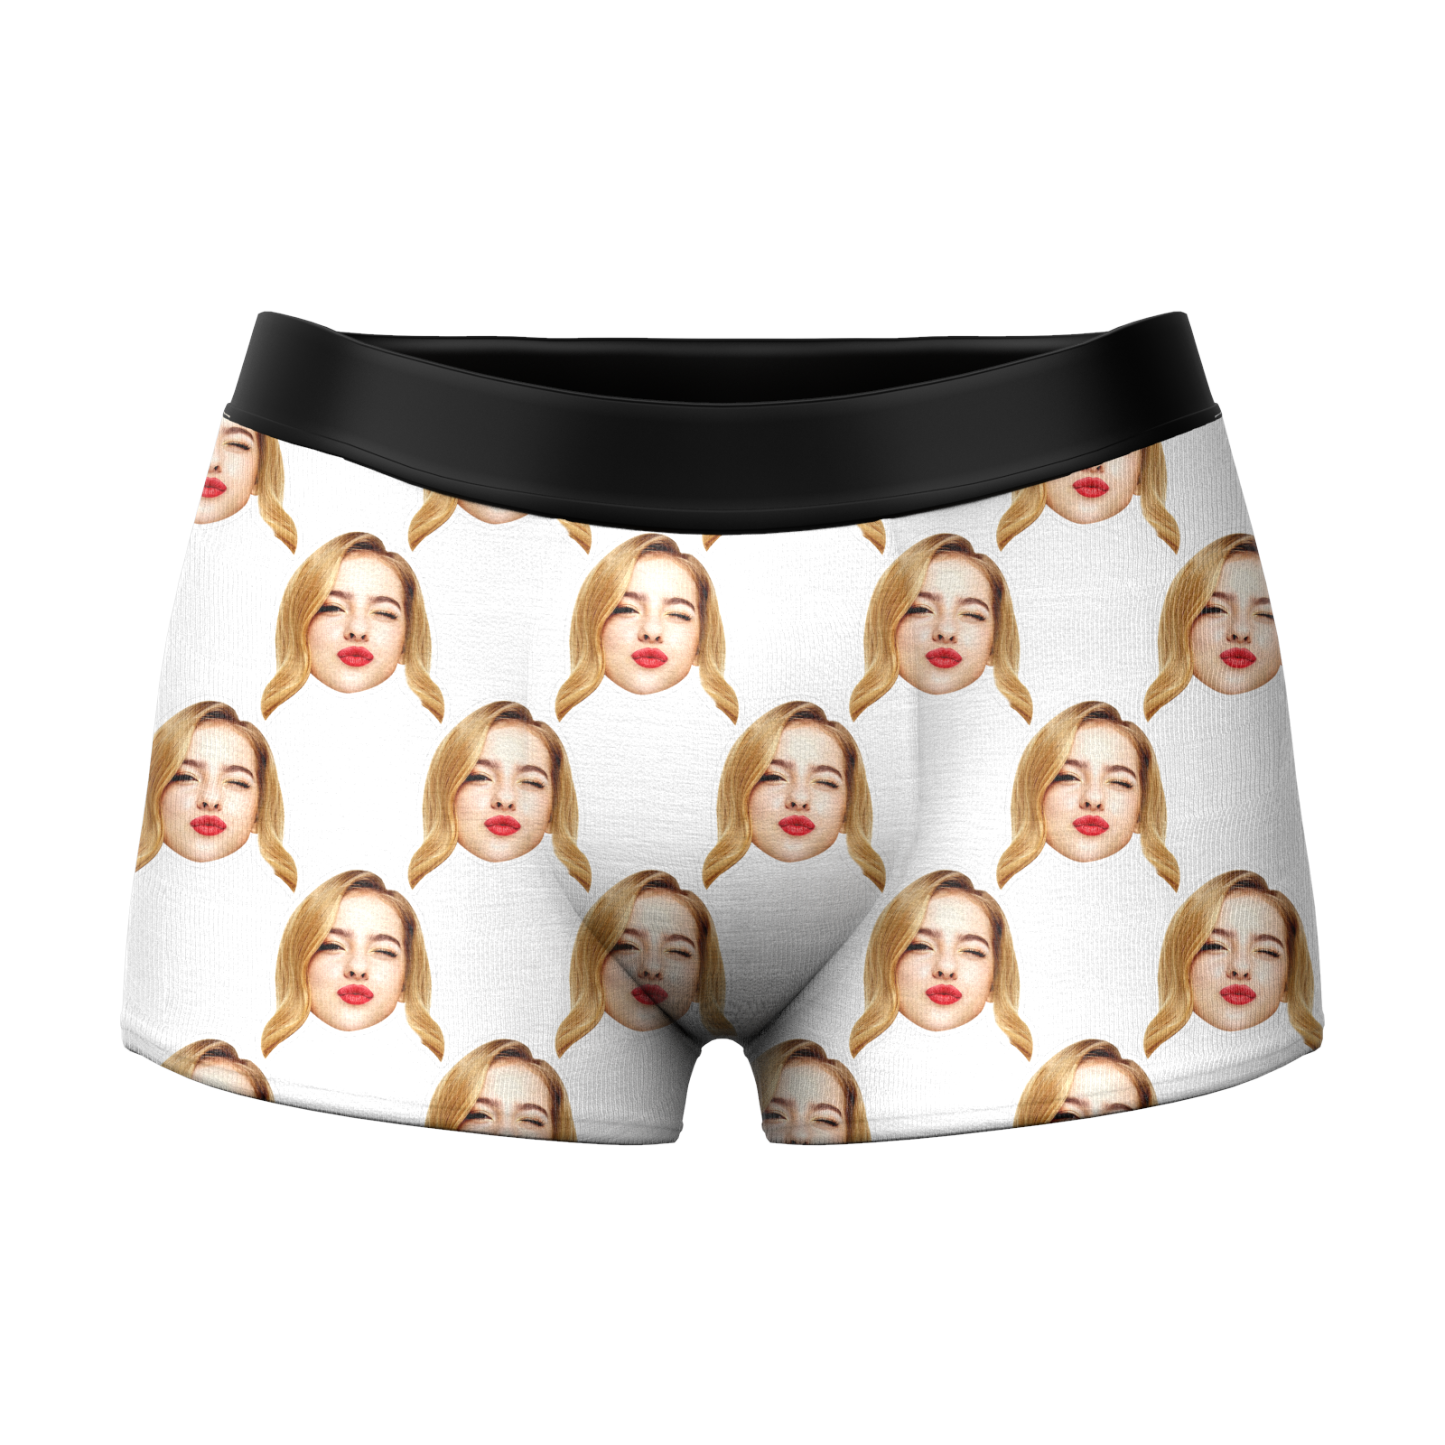 Men's Custom Colorful Face Boxer Shorts 3D Online Preview Personalized LGBT Gifts - MyFaceSocksAu